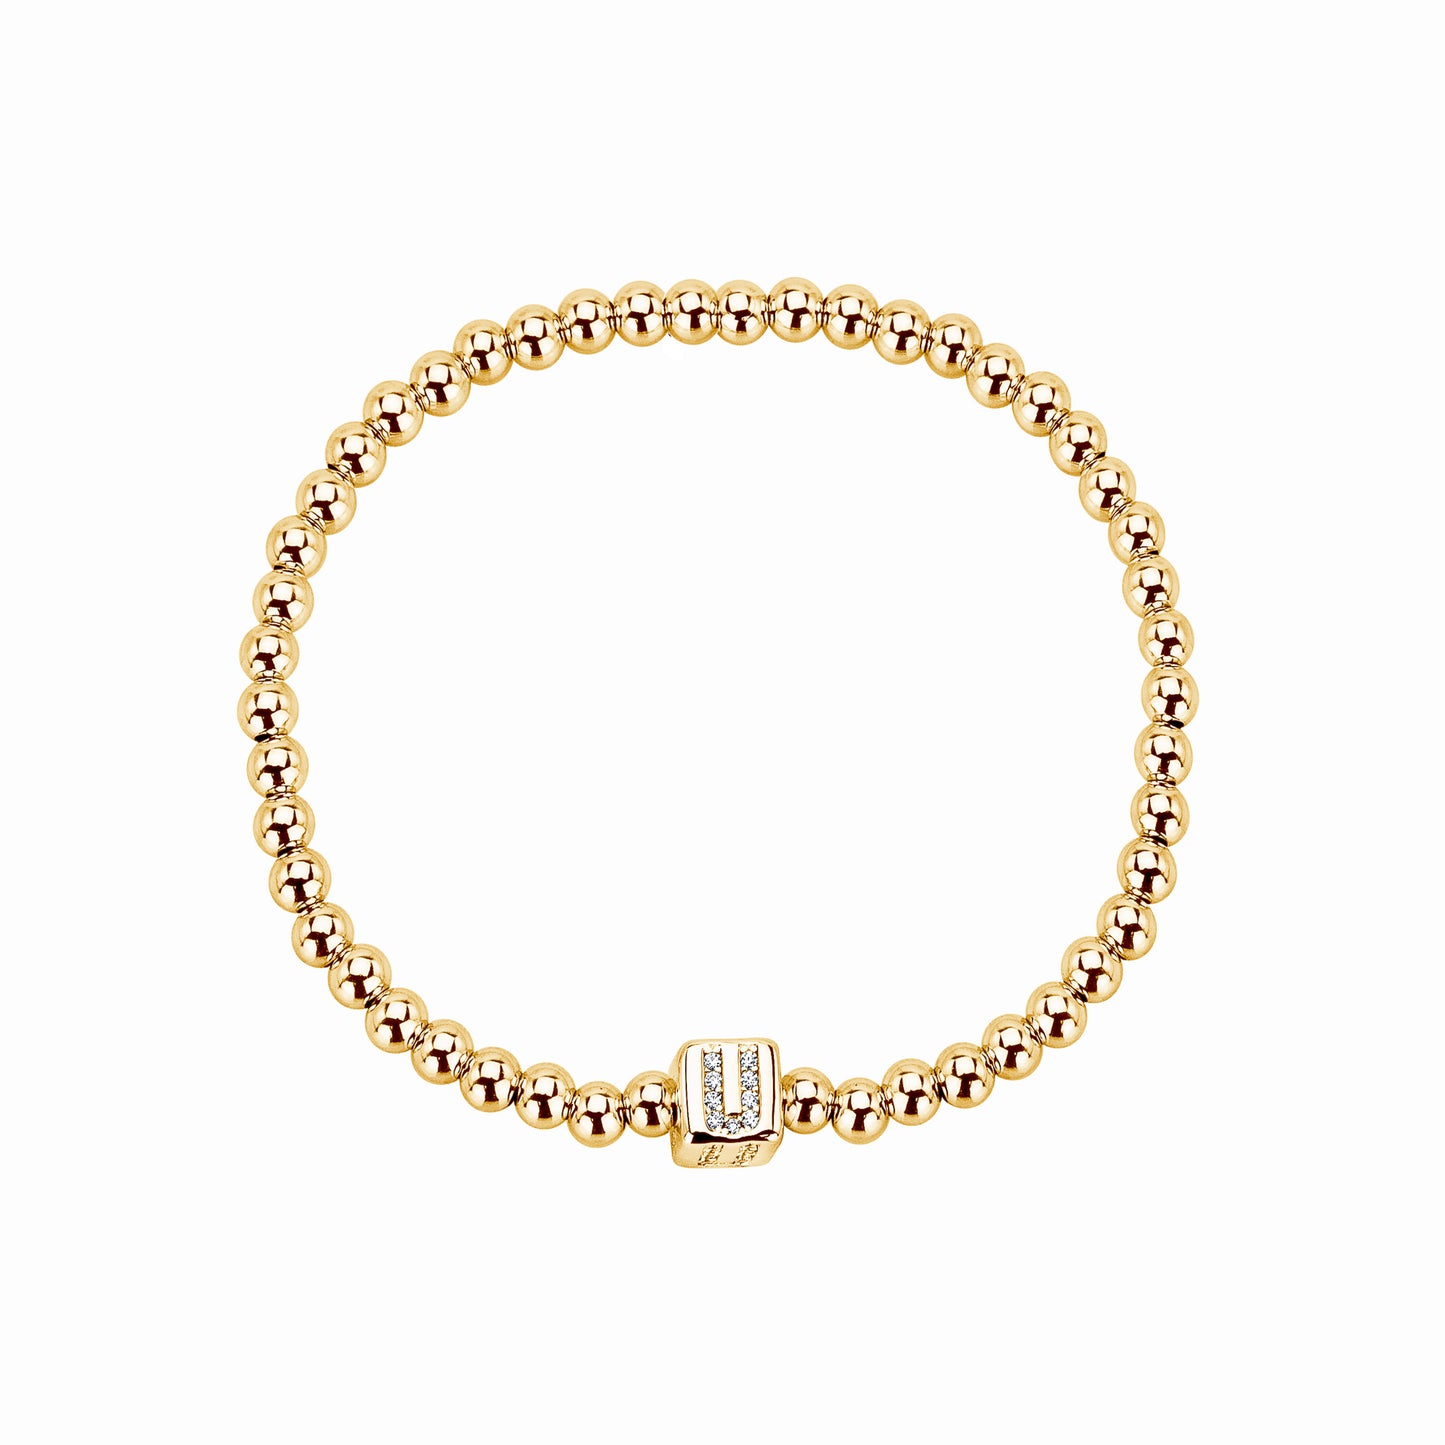 Initial 4 mm Stretch Ball Bracelet, 6.25", Yellow Gold